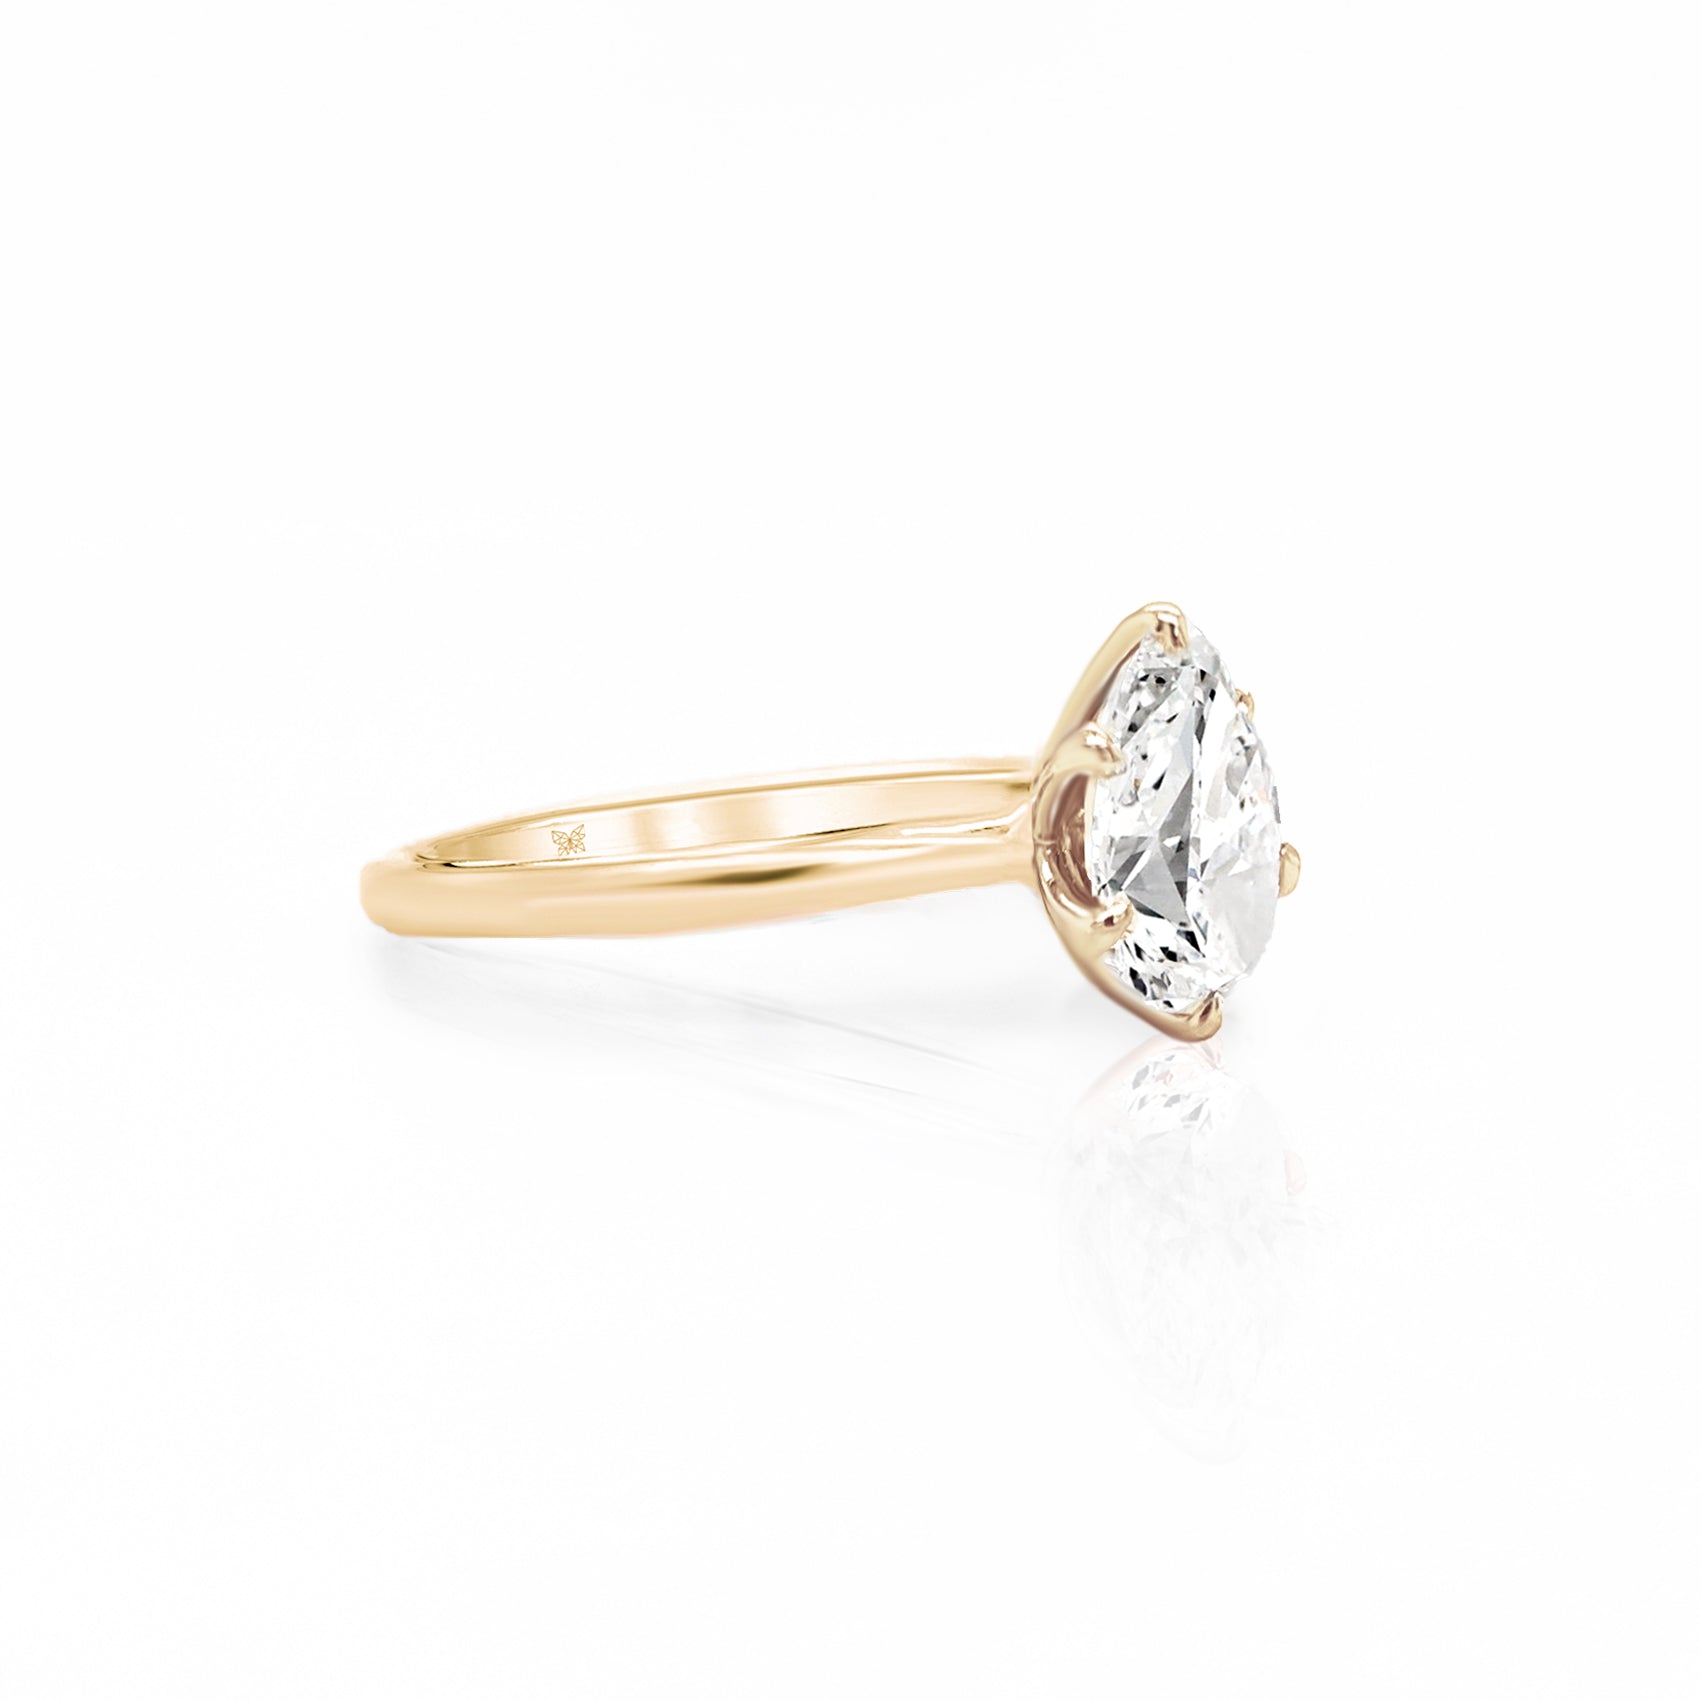 Majestic Marcella Engagement Ring